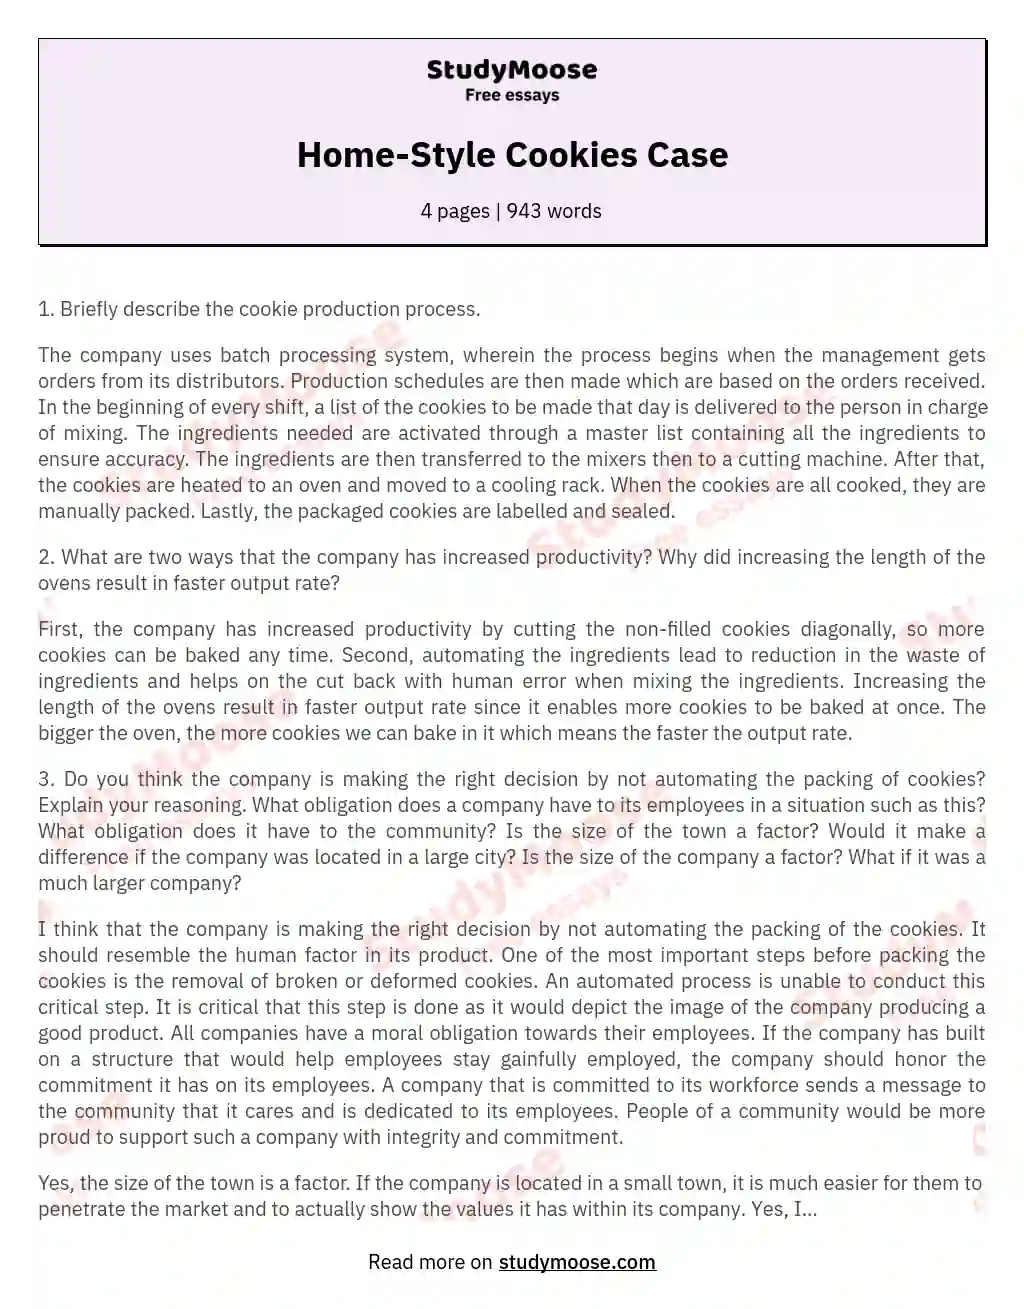 Home-Style Cookies Case essay